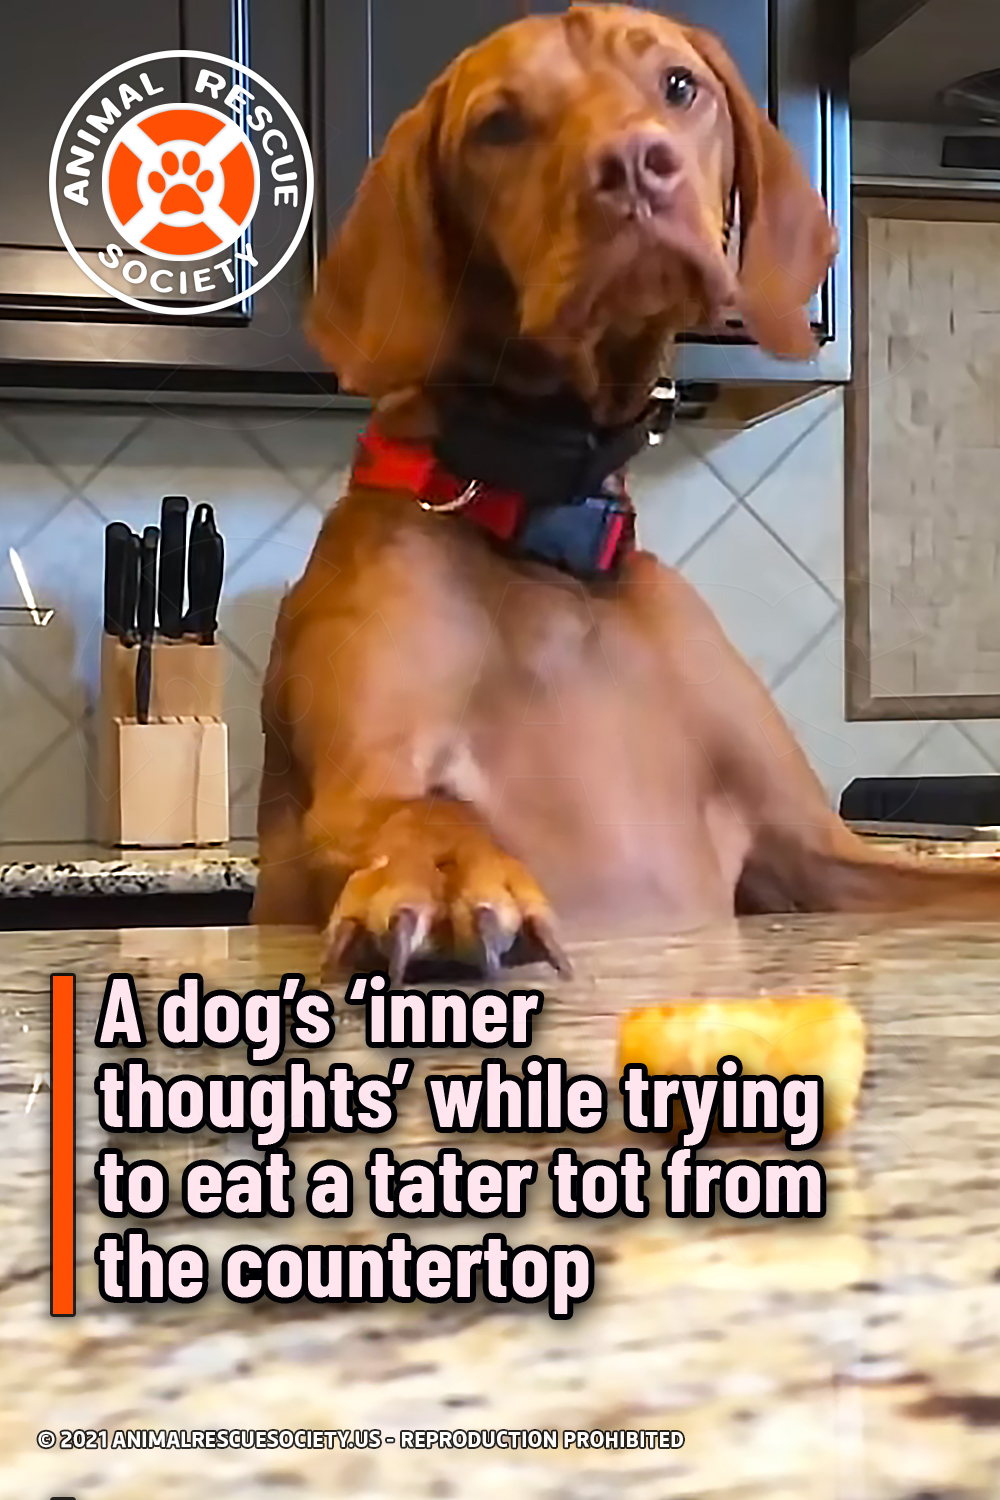 A dog’s ‘inner thoughts’ while trying to eat a tater tot from the countertop